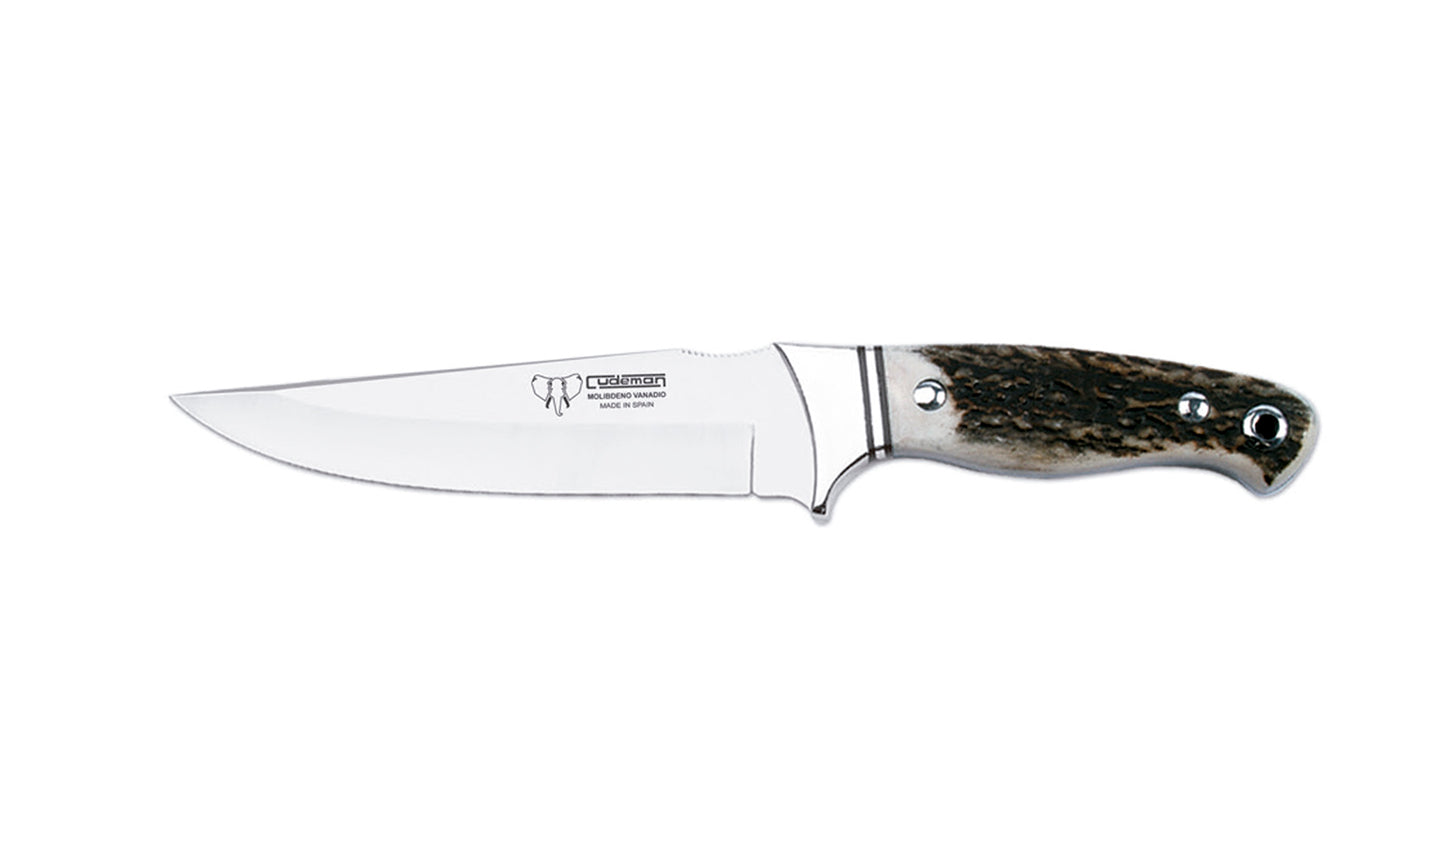 Cudeman Full Tang Hollow Grind Stainless Knife w/ Stag Handle (248-C)